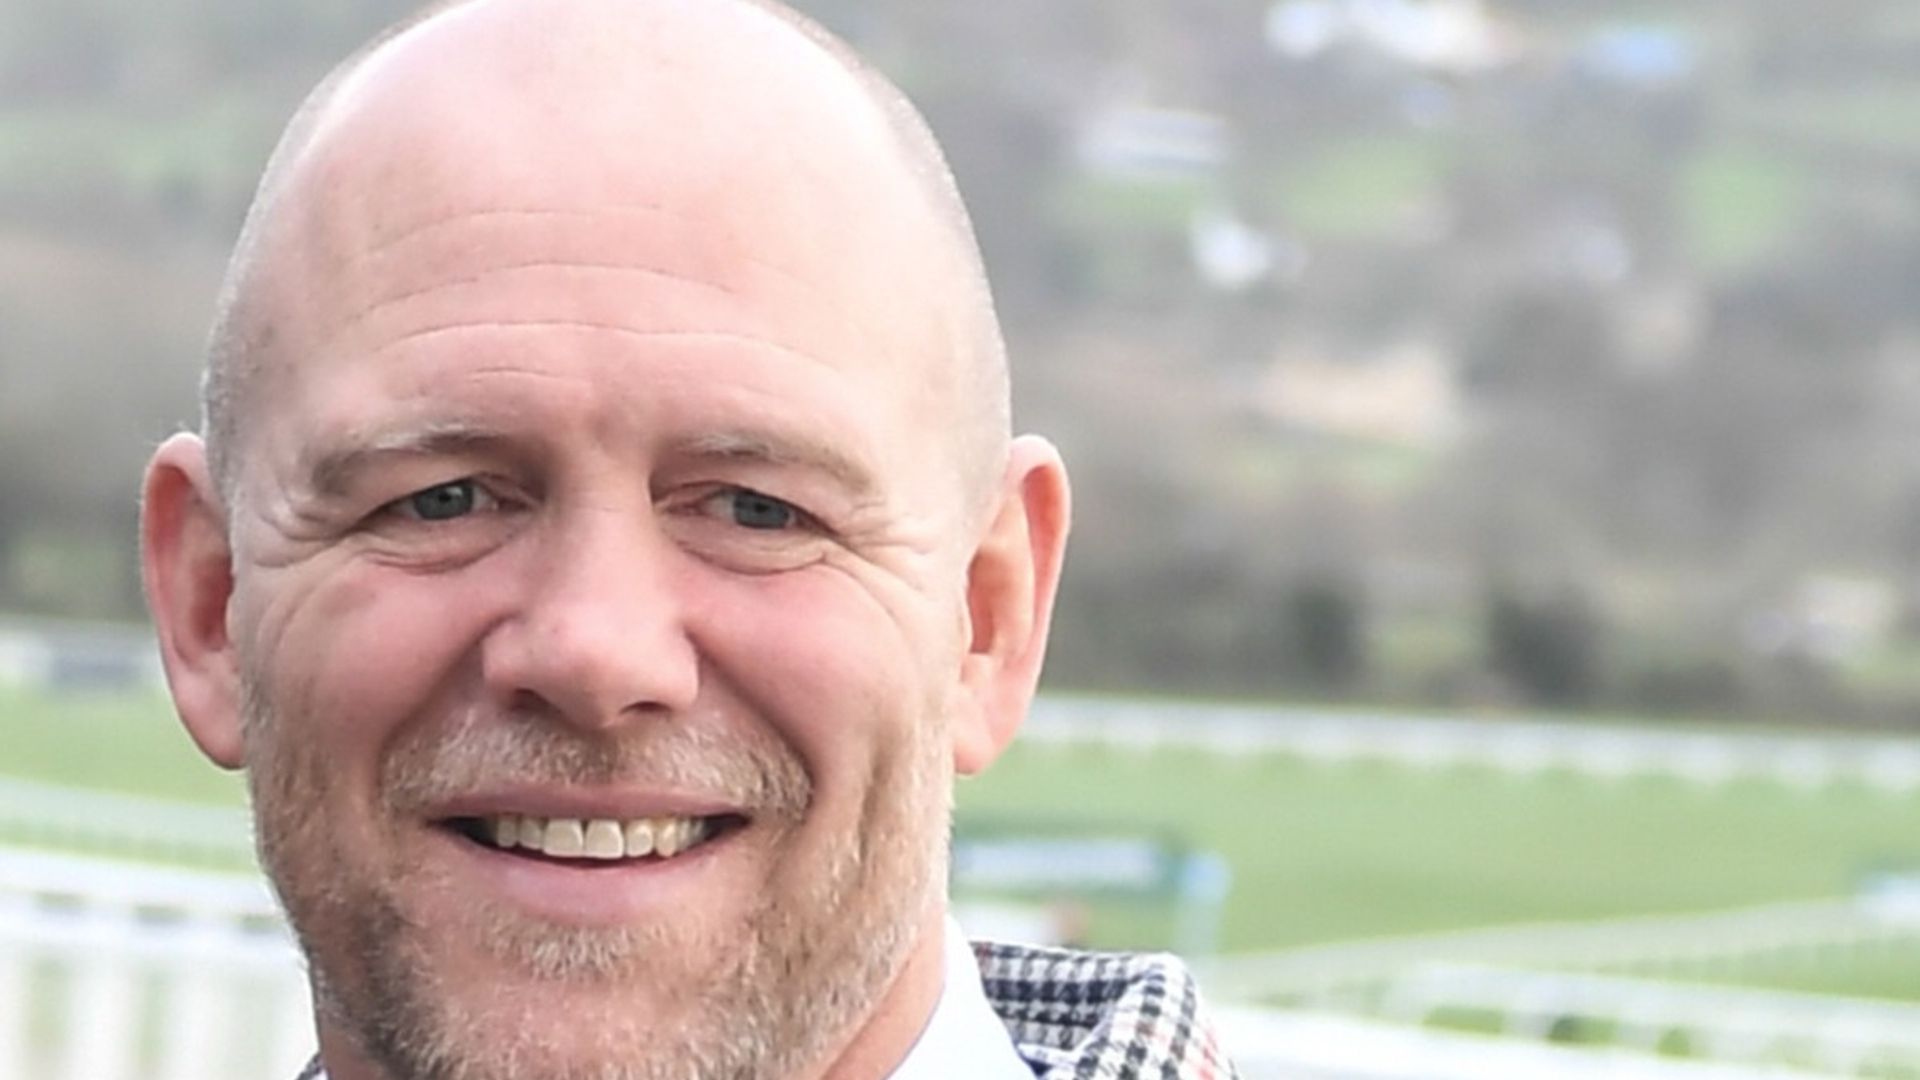 Mike Tindall shares glimpse inside his garden during lockdown